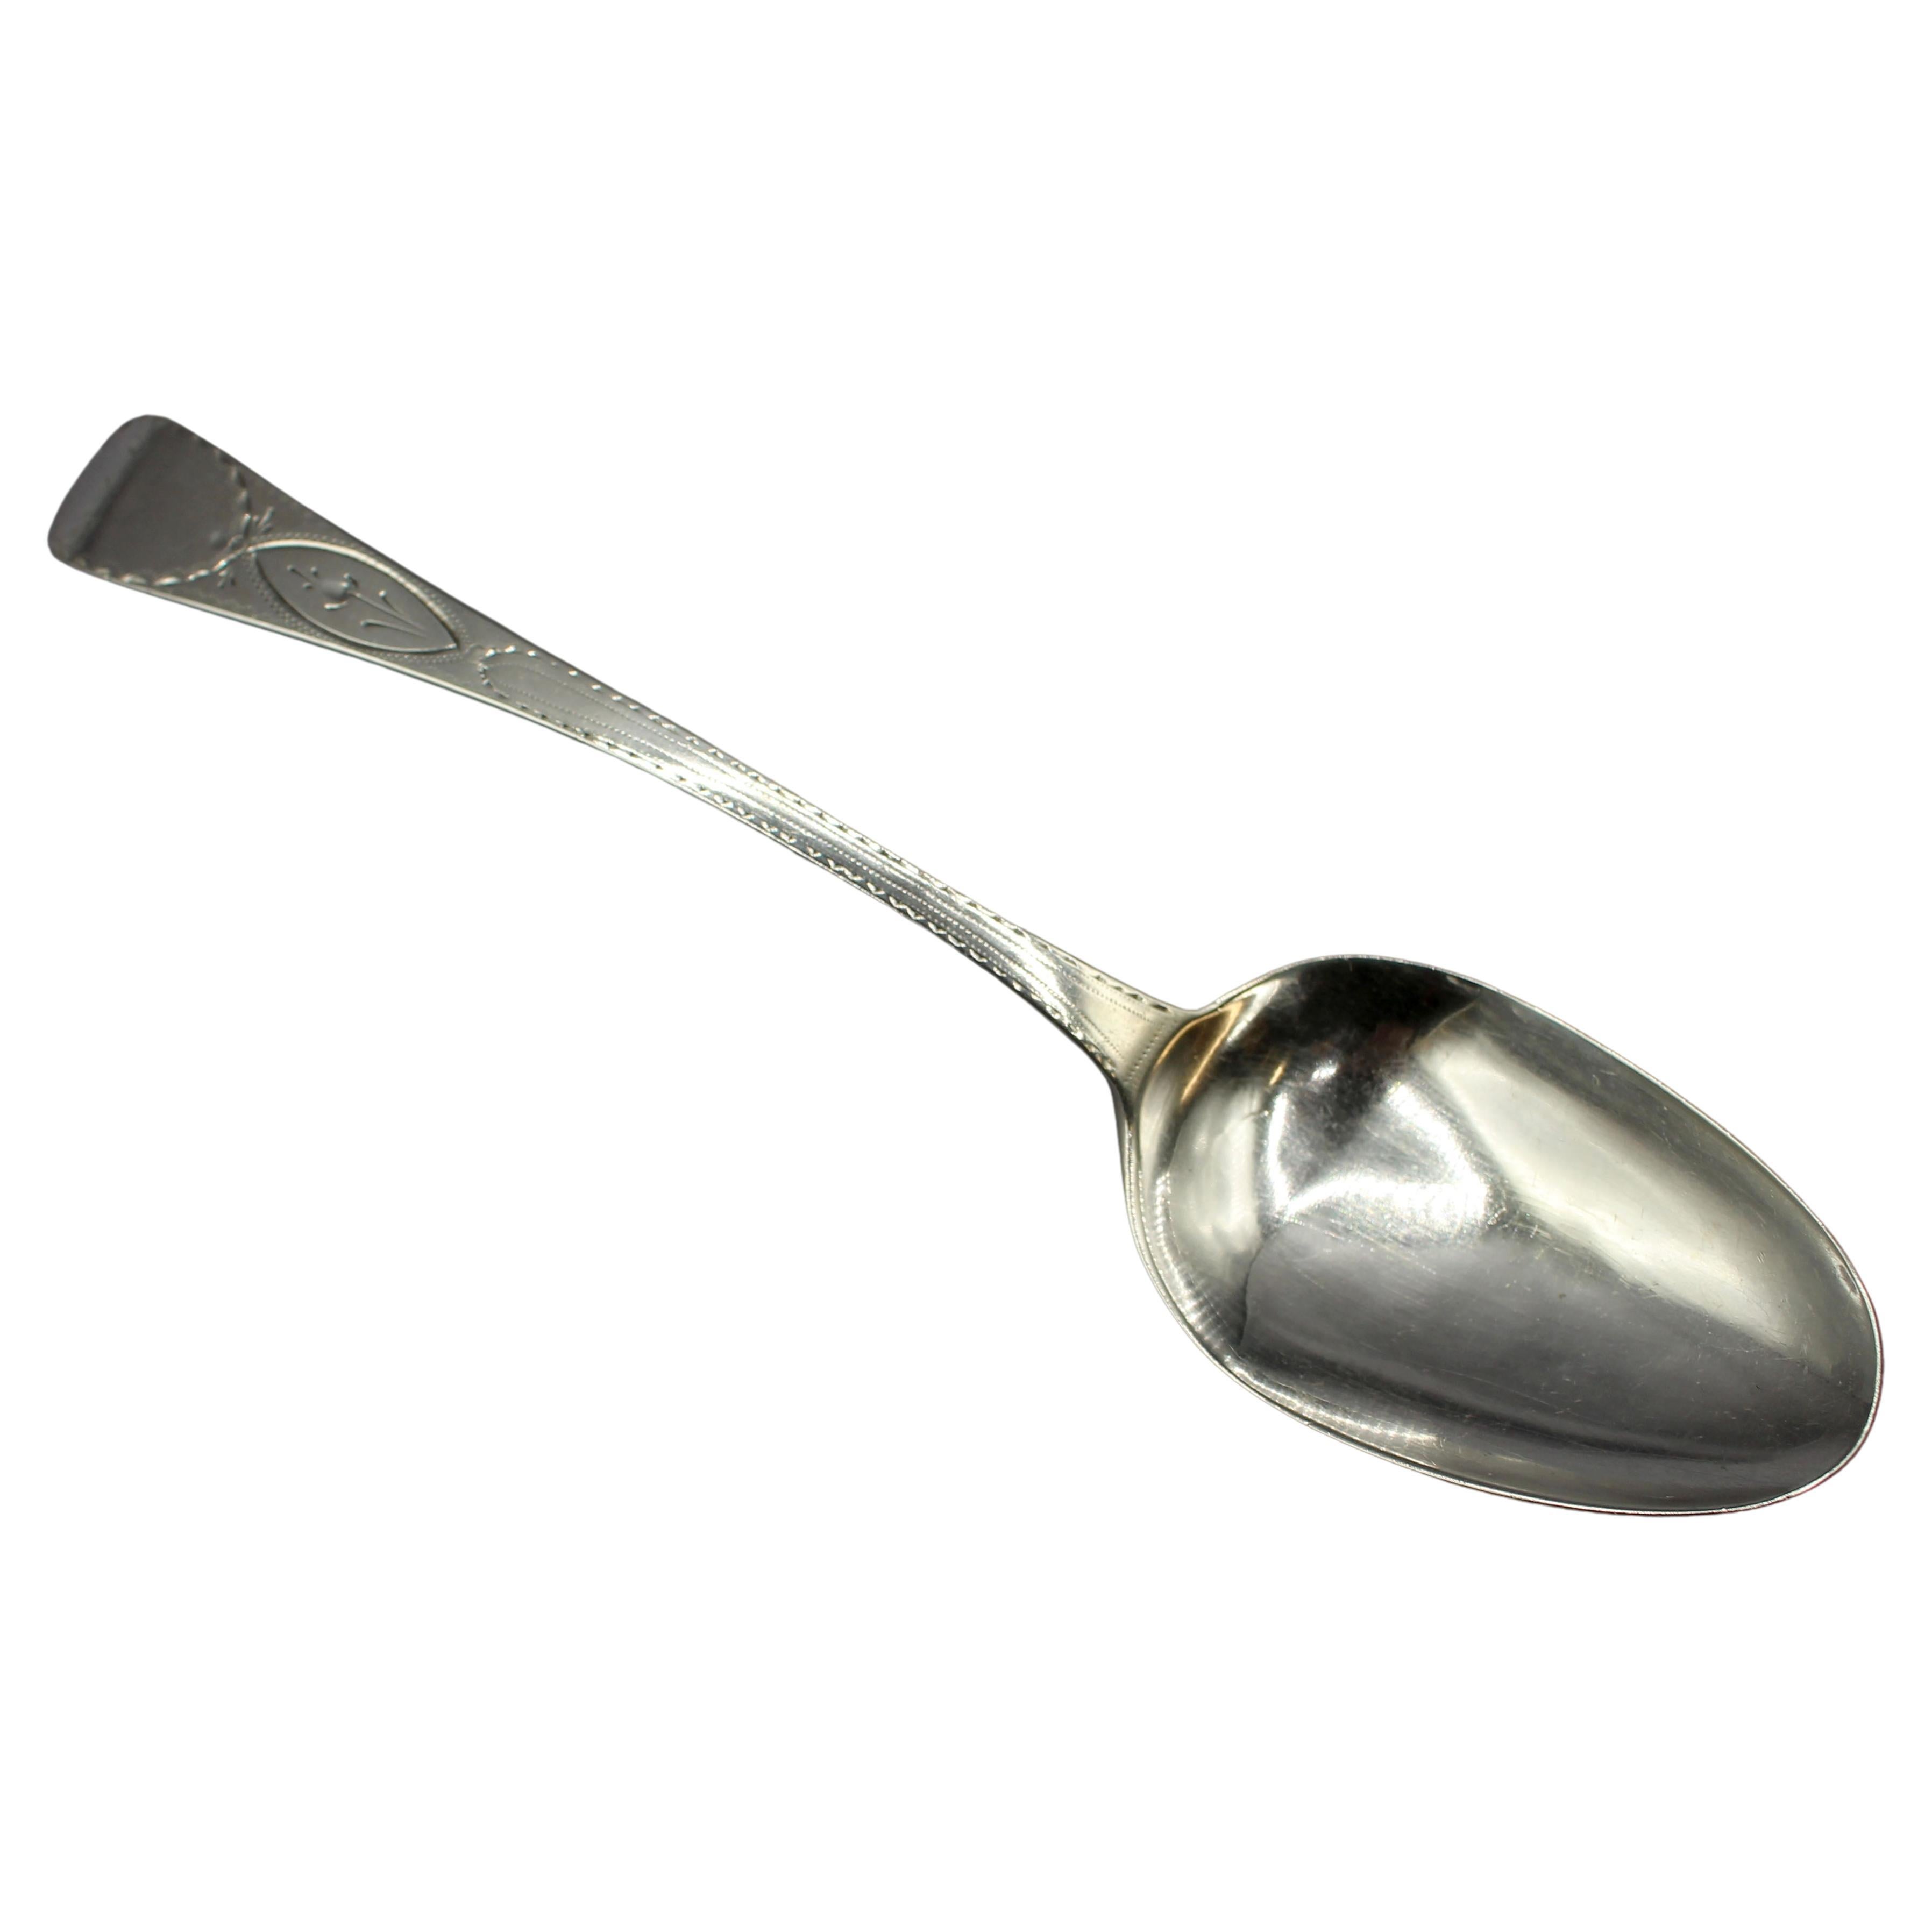 Sterling Silver Tablespoon by William Bateman I, London, 1817